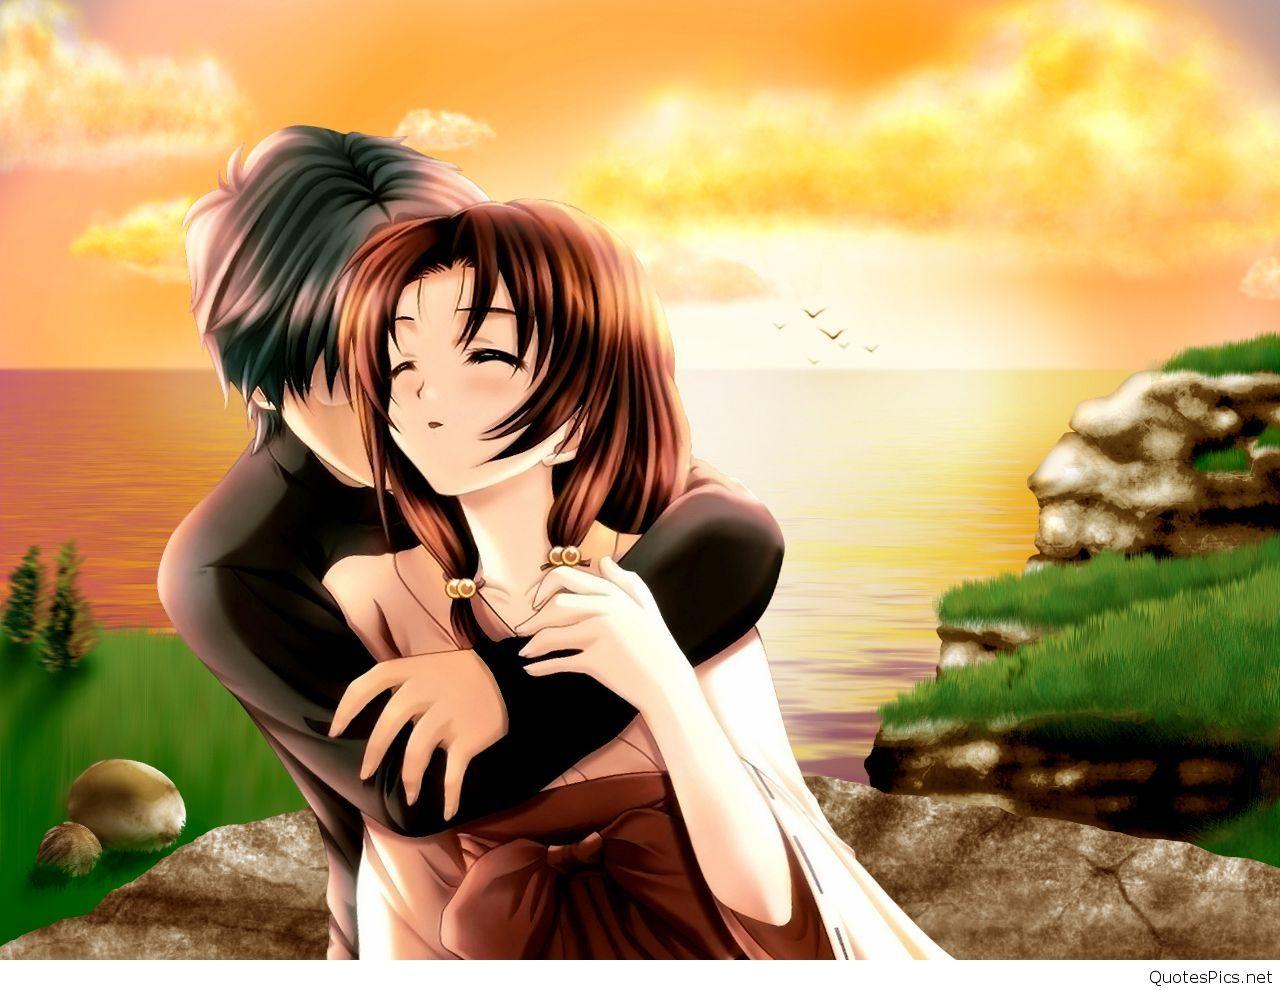 Romantic Anime Boyfriend And Girlfriend Wallpapers - Wallpaper Cave